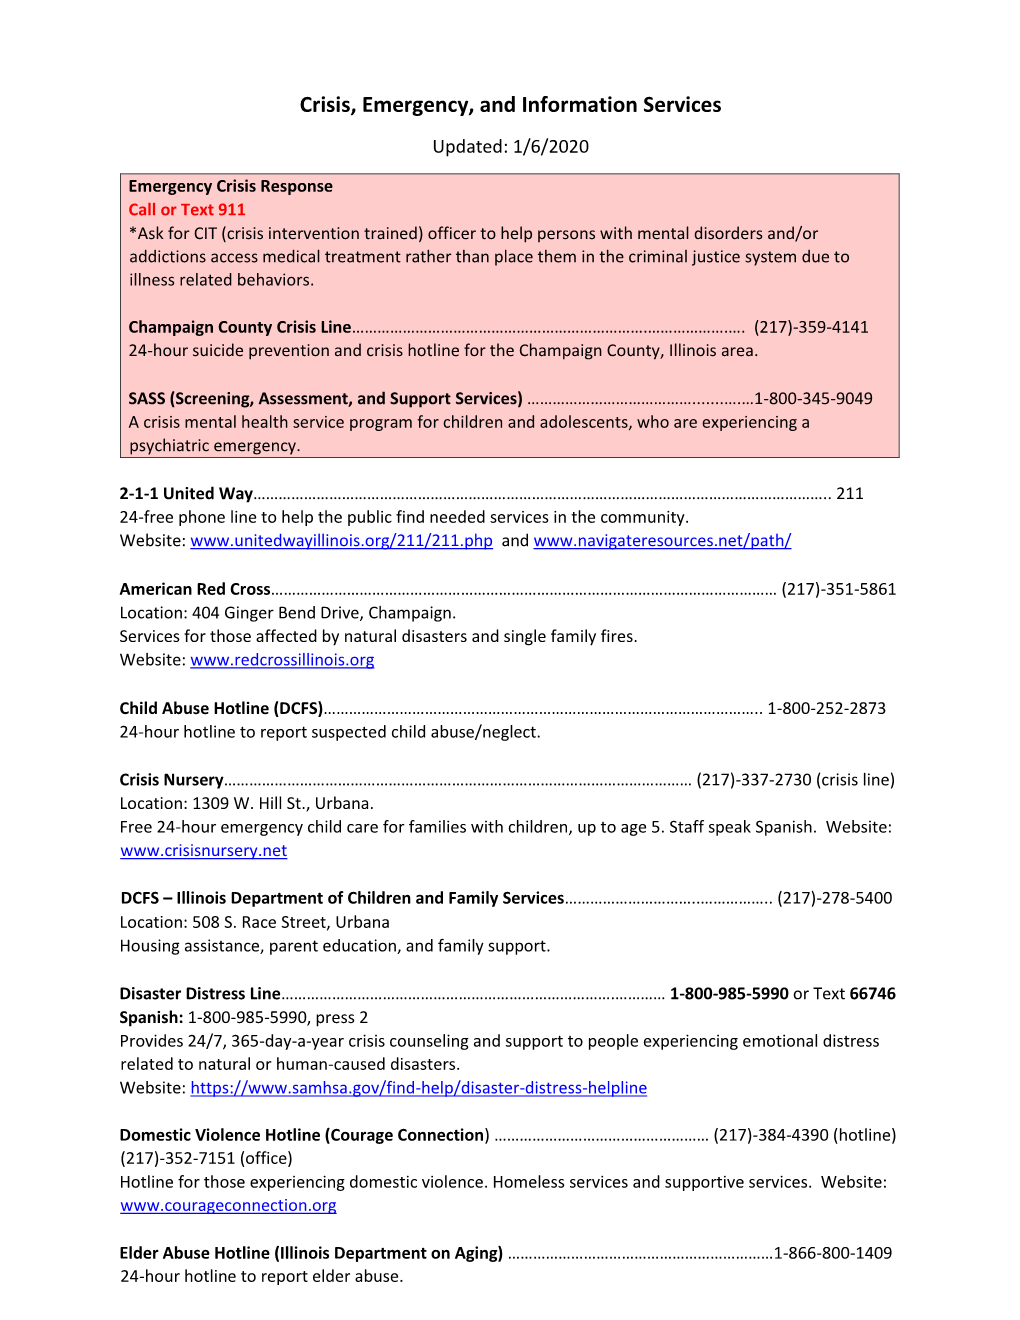 Crisis, Emergency, and Information Services Updated: 1/6/2020